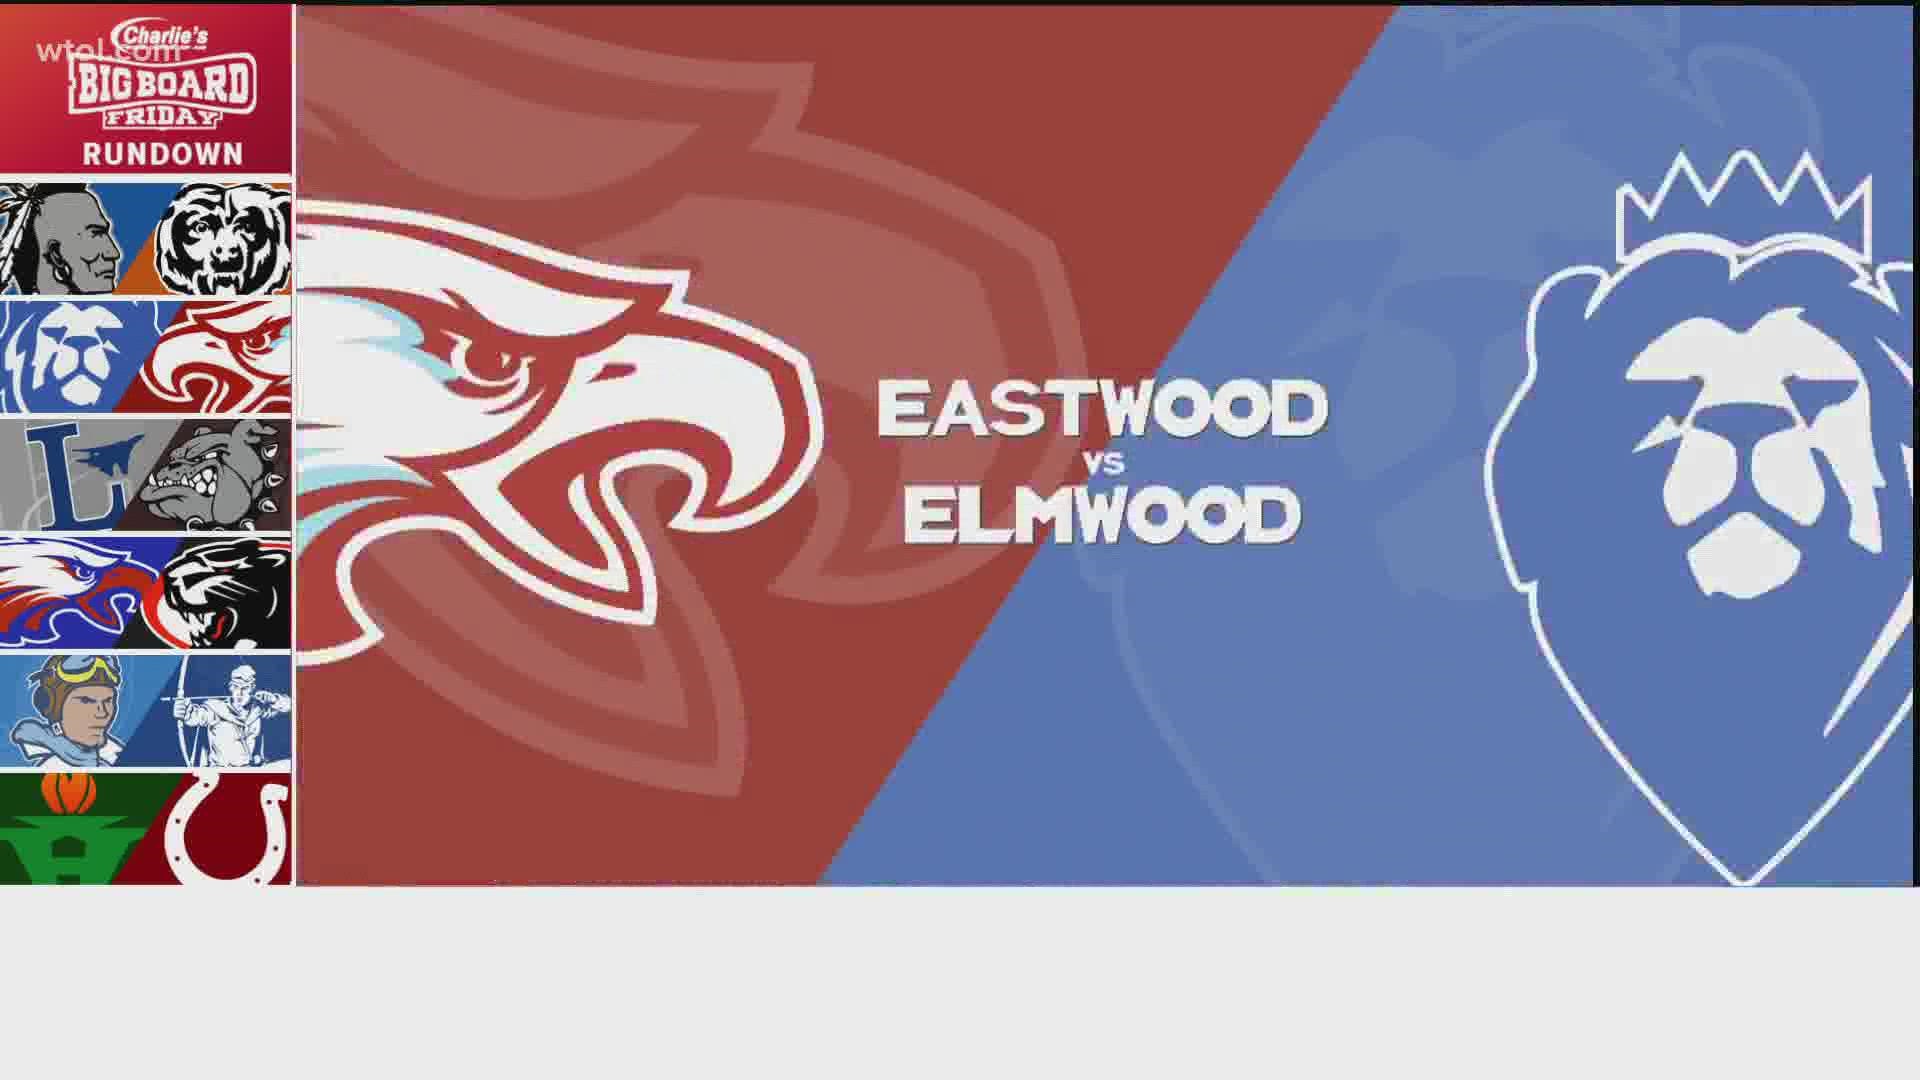 Eastwood took the trip to Elmwood Friday, taking home a win with a score of 70-35.